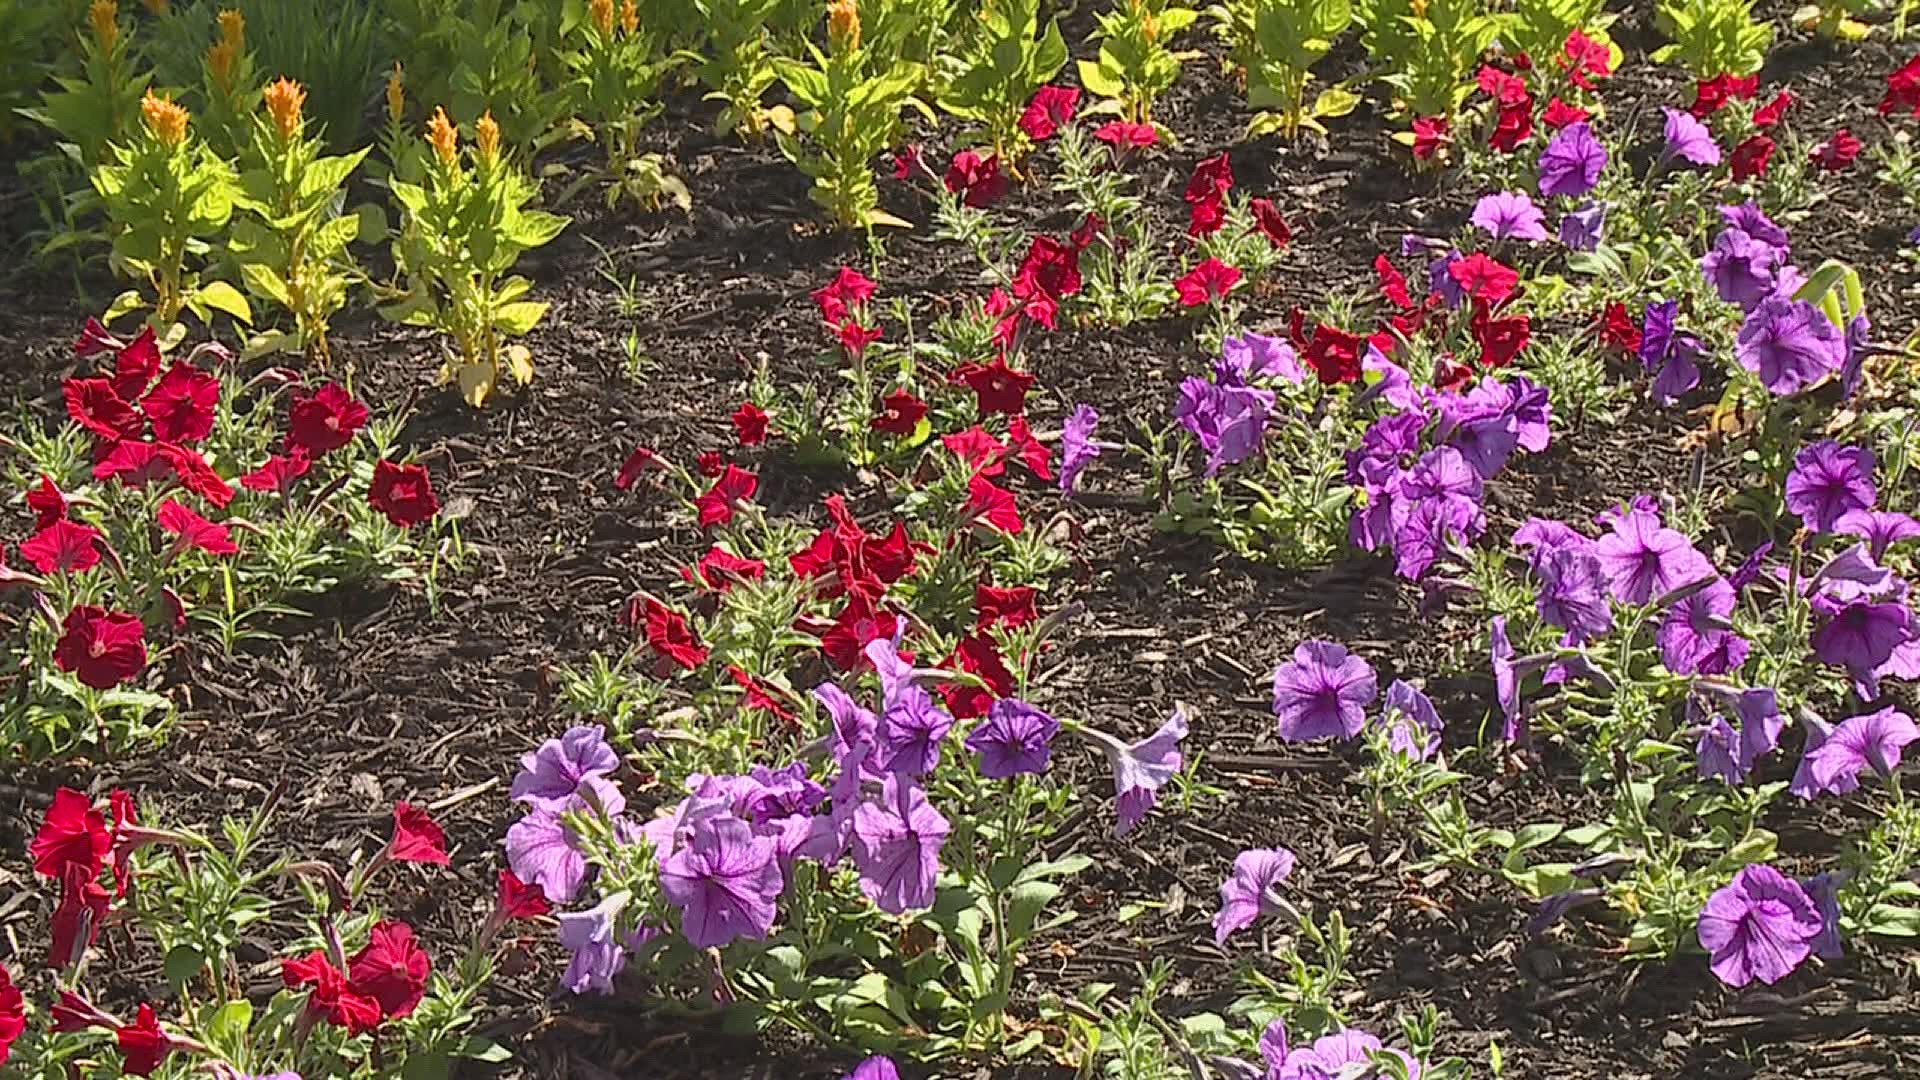 The Rock Island Parks Department wants groups and organizations throughout the Quad Cities to help keep the city's parks looking great.